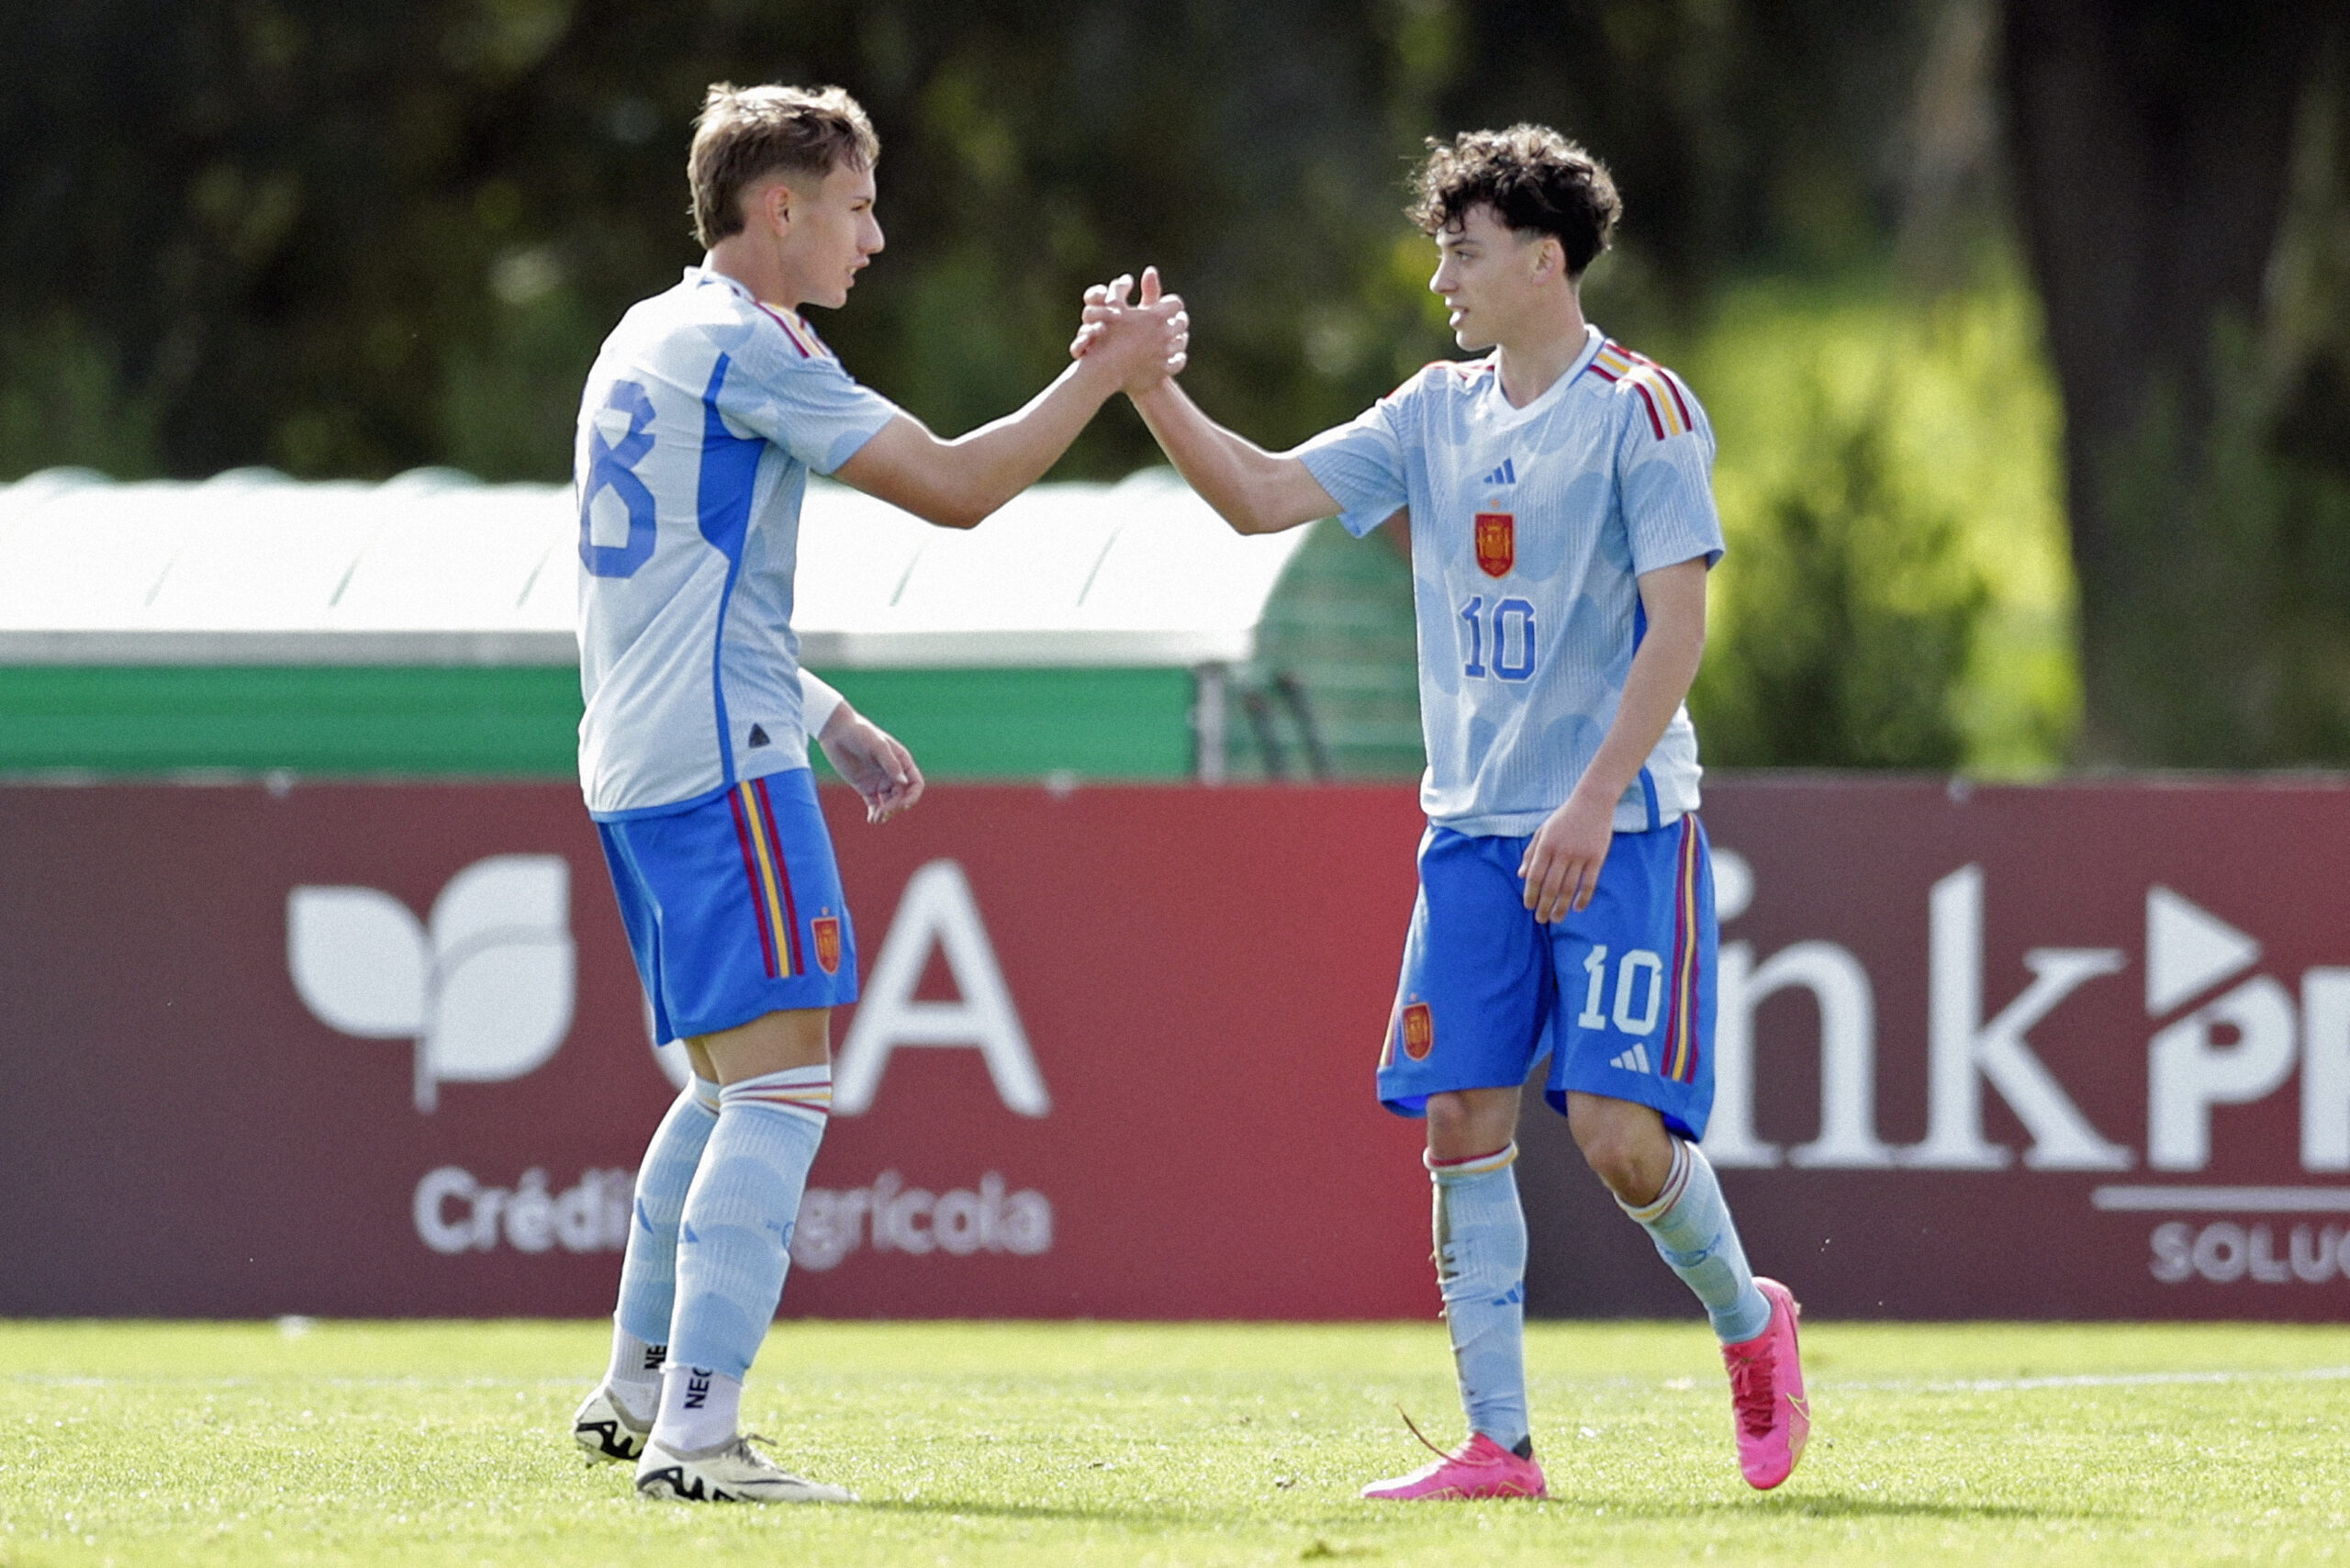 ALBUFEIRA, PORTUGAL - FEBRUARY 10: goal celebration for U17 Spain scored by Paulo Iago (R) for 0-1 with Adrian Arnuncio (L) during the Germany U17 v Spain U17 - Four Nations Tournament match on February 10, 2024 in Albufeira, Portugal.